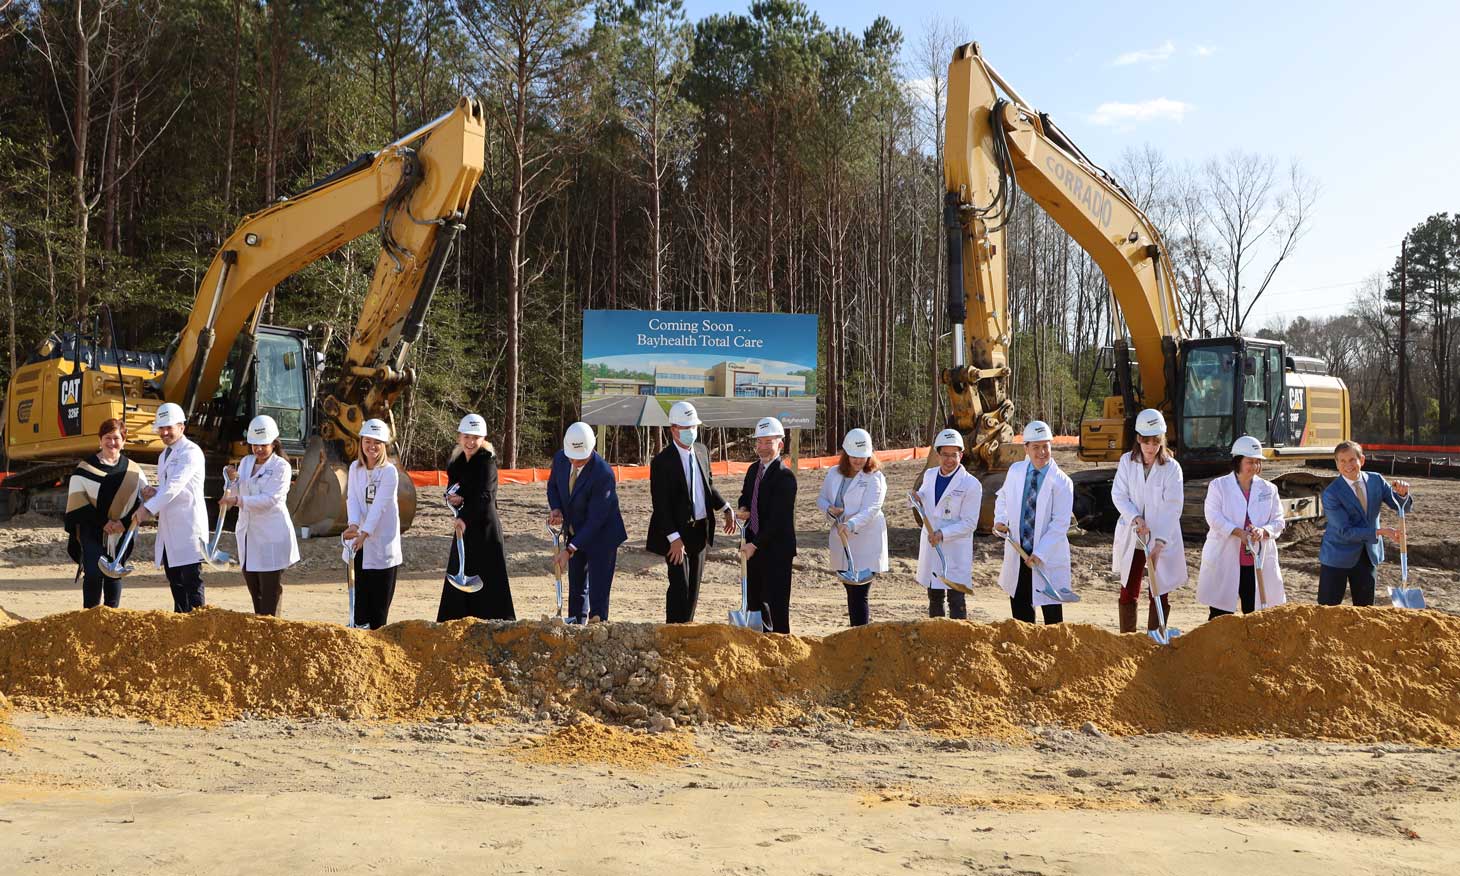 Featured image for “Bayhealth hosted a groundbreaking ceremony for Bayhealth Total Care”